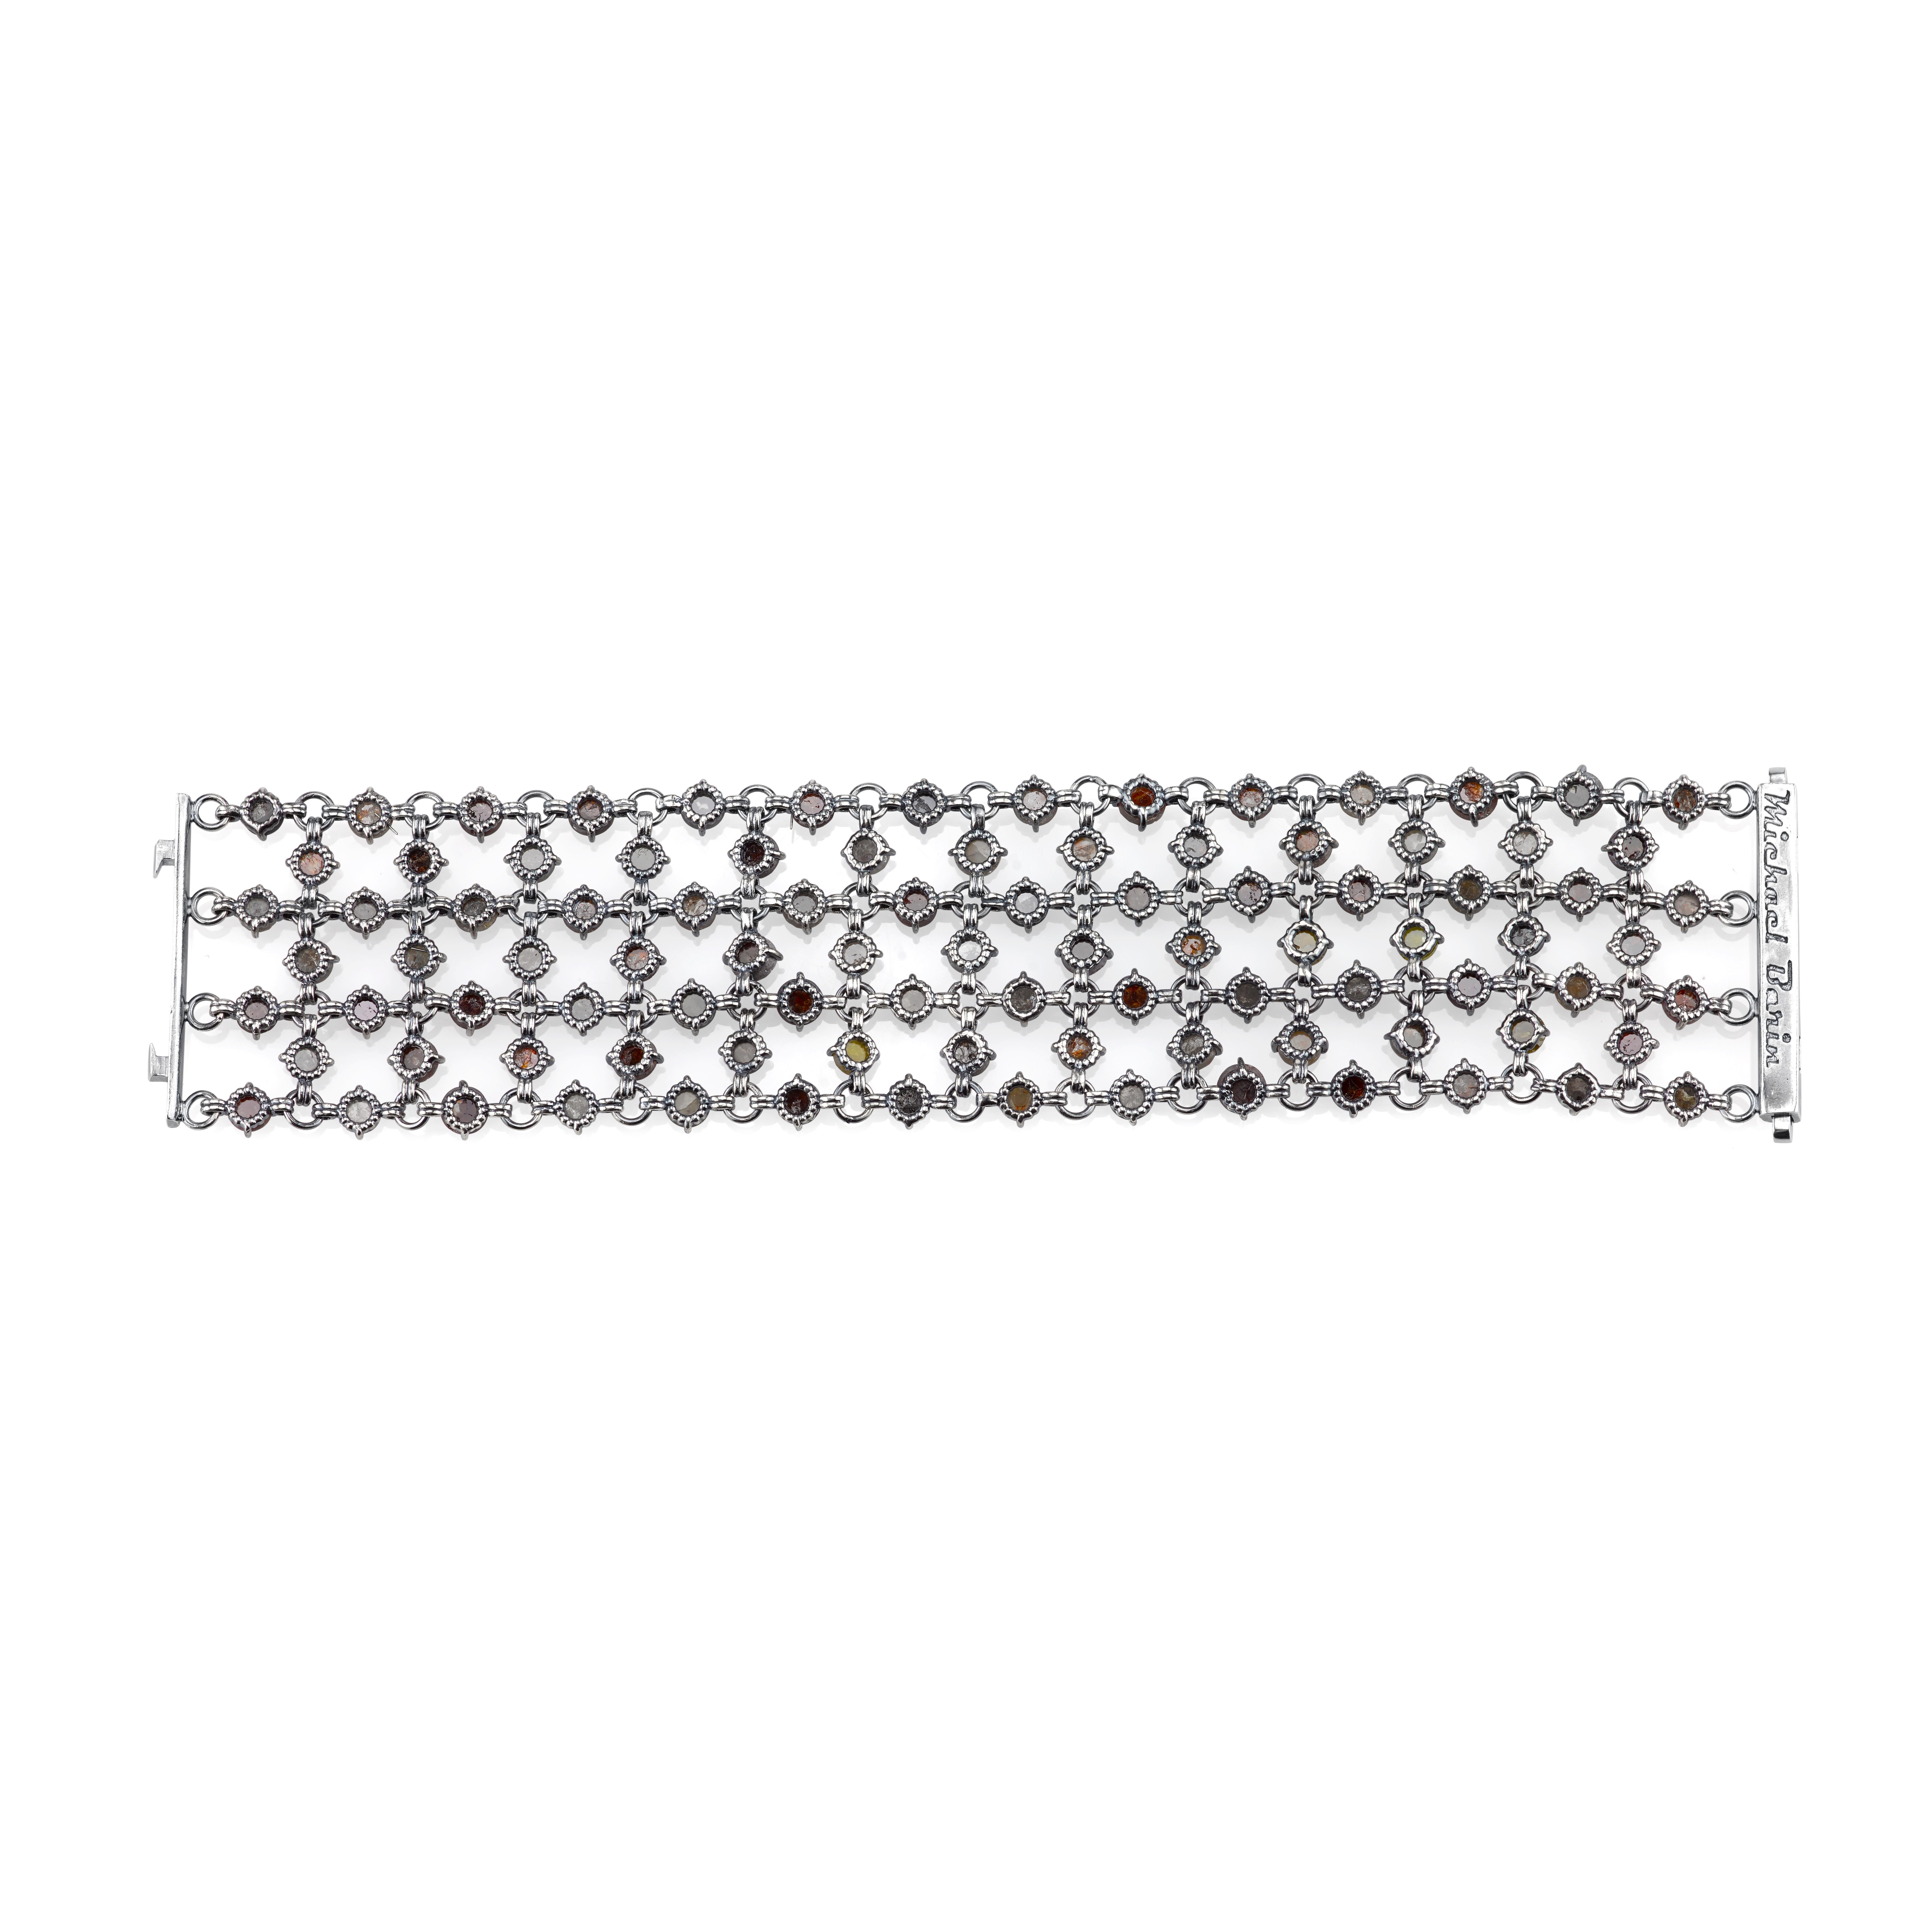  This stunning bracelet showcases 68 carats of natural and earthy rustic diamonds, set against the muted tones of Organic Silver. With a hand-engraved design on the clasp, this piece showcases a perfect balance between modern and traditional